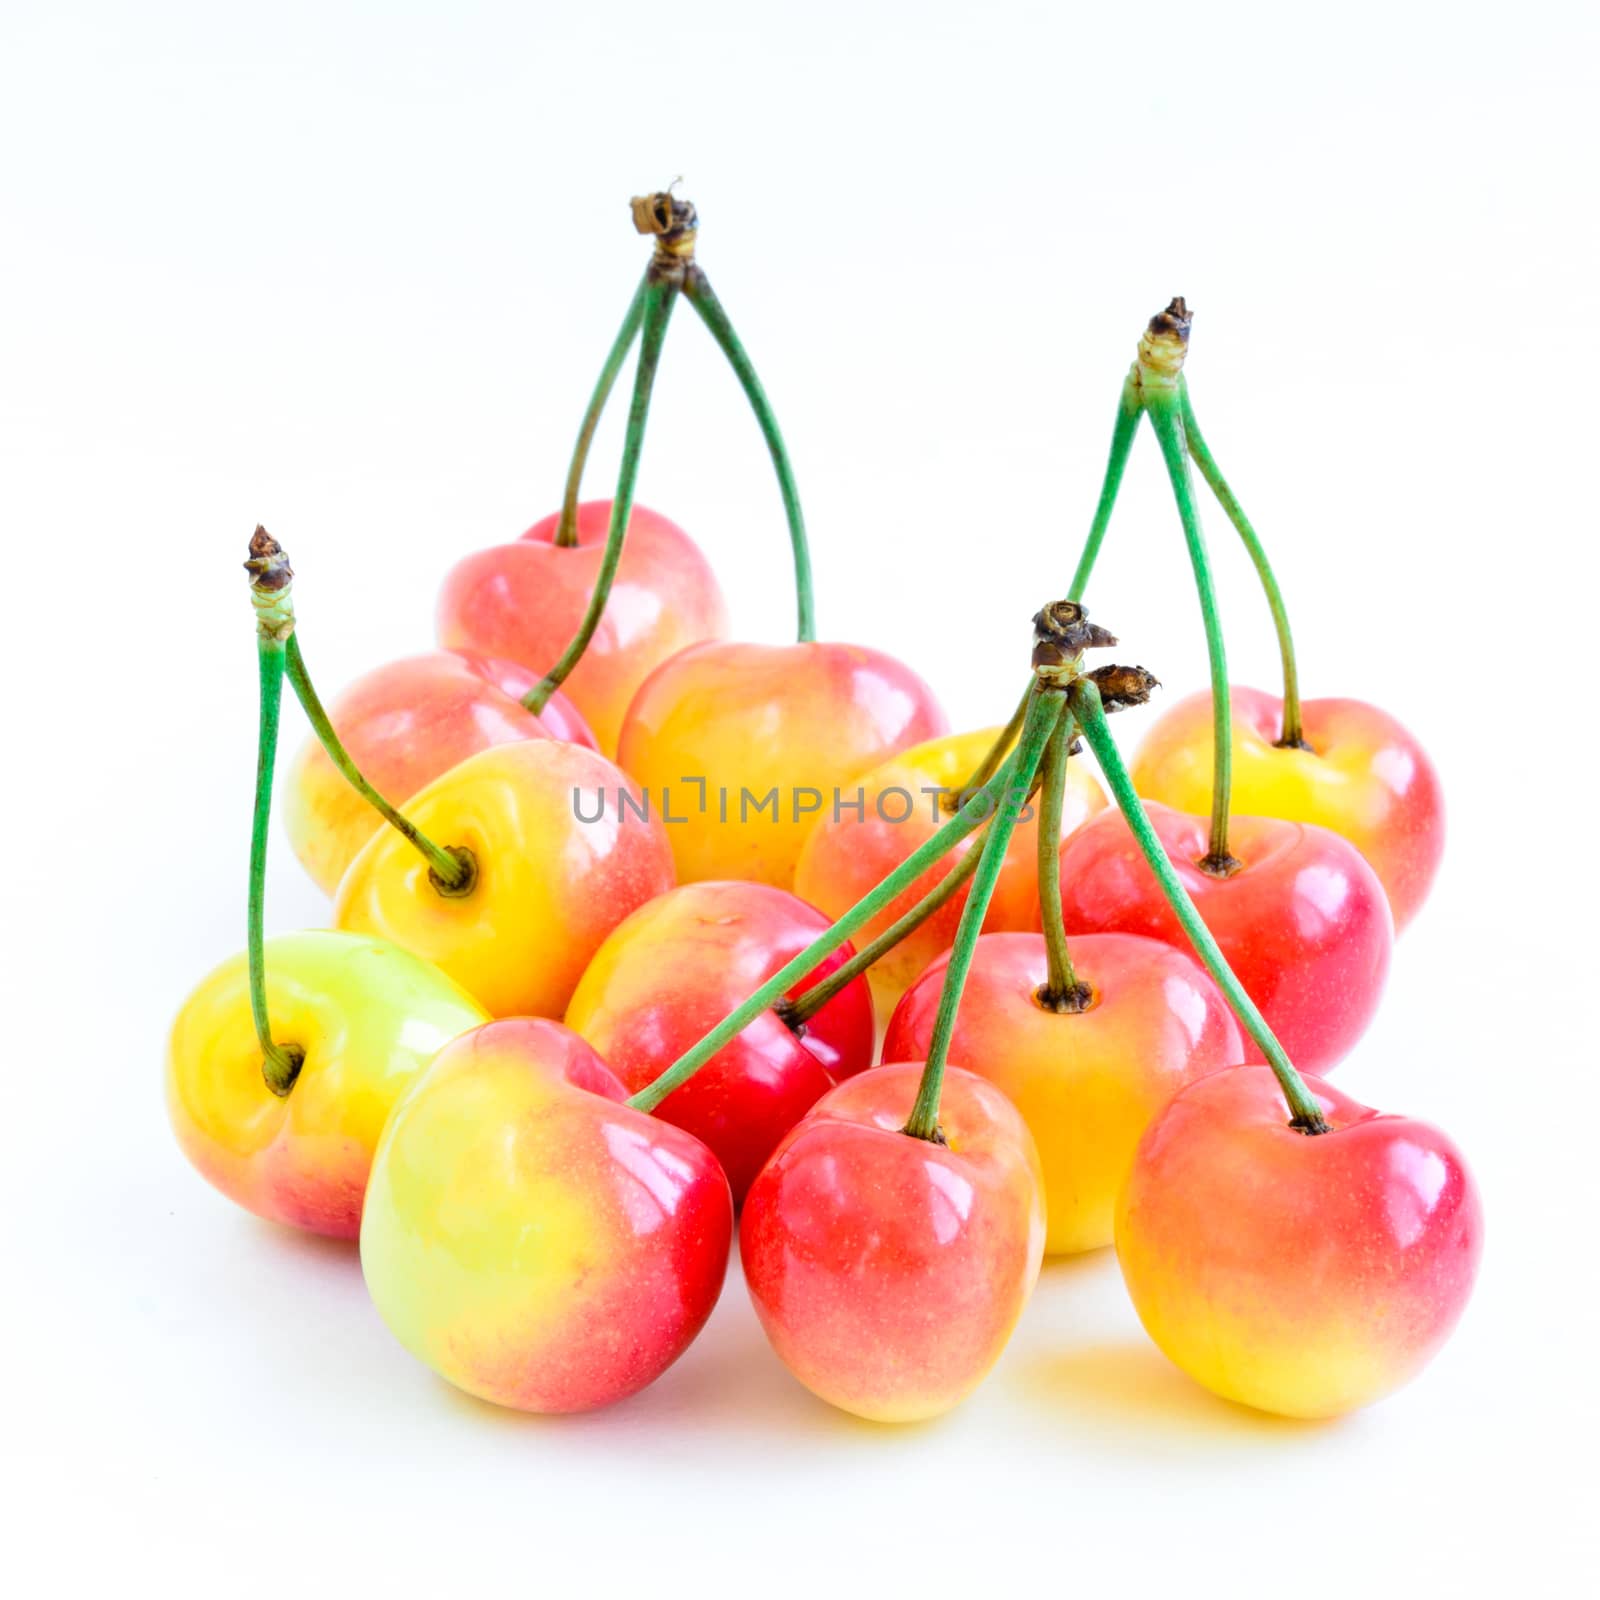 Group of Rainer cherries joined with stem isolated on white background. Fresh picked organic cherries grown in Yakima Valley, Washington State, USA.